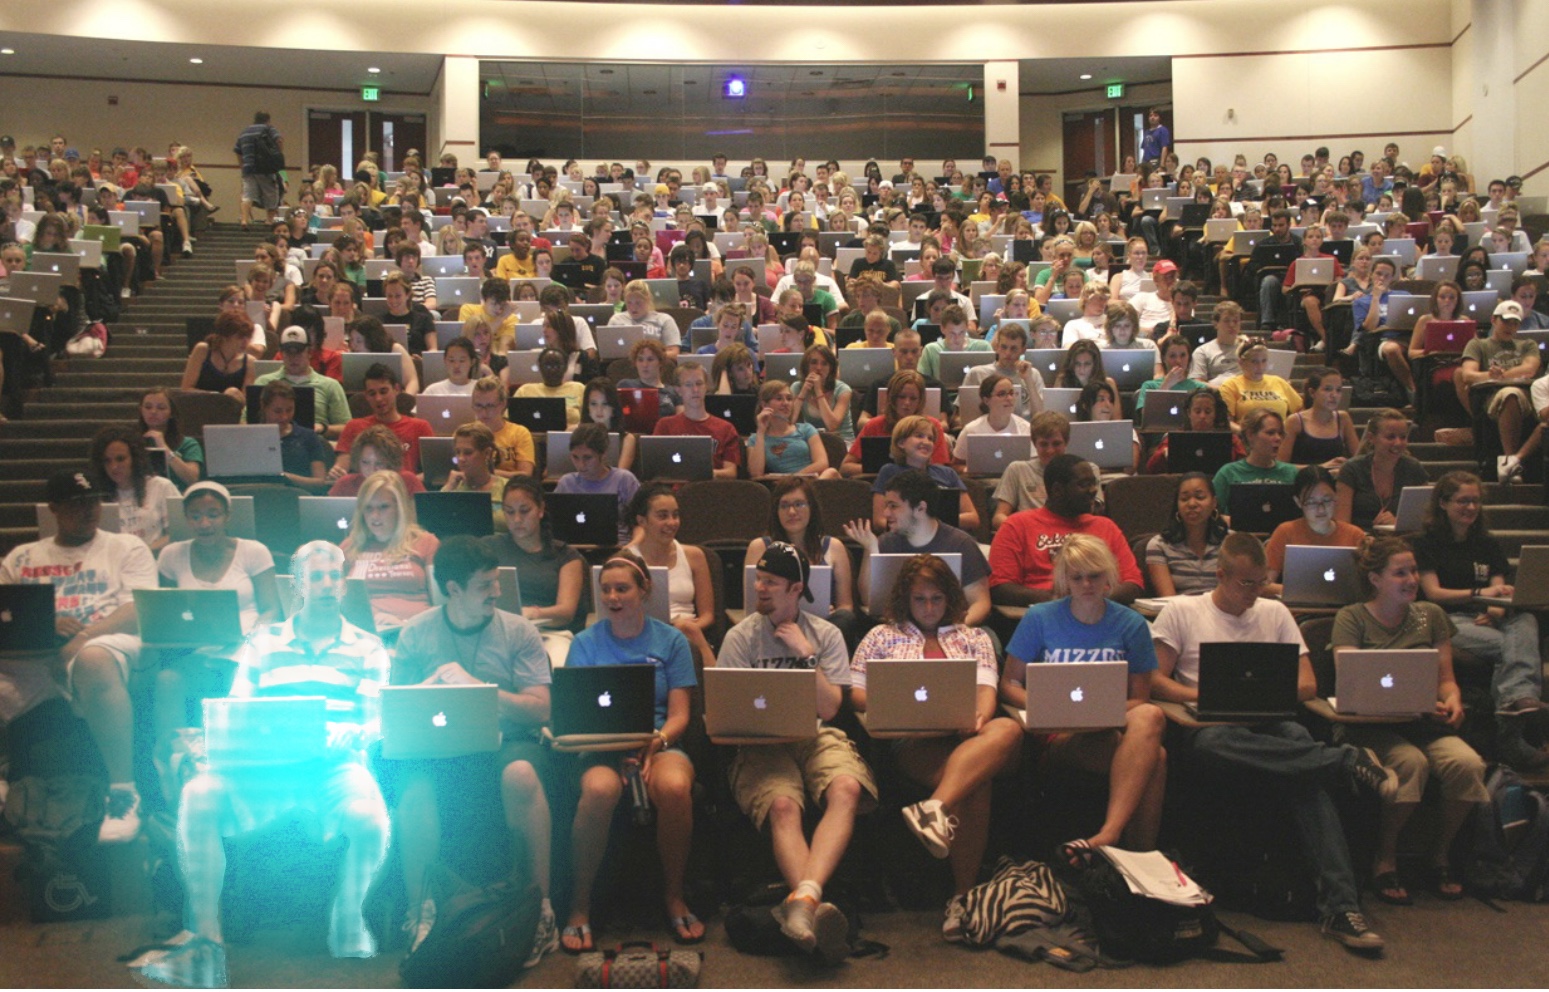 Photoshopped holographic student sitting in lecture hall among many real students